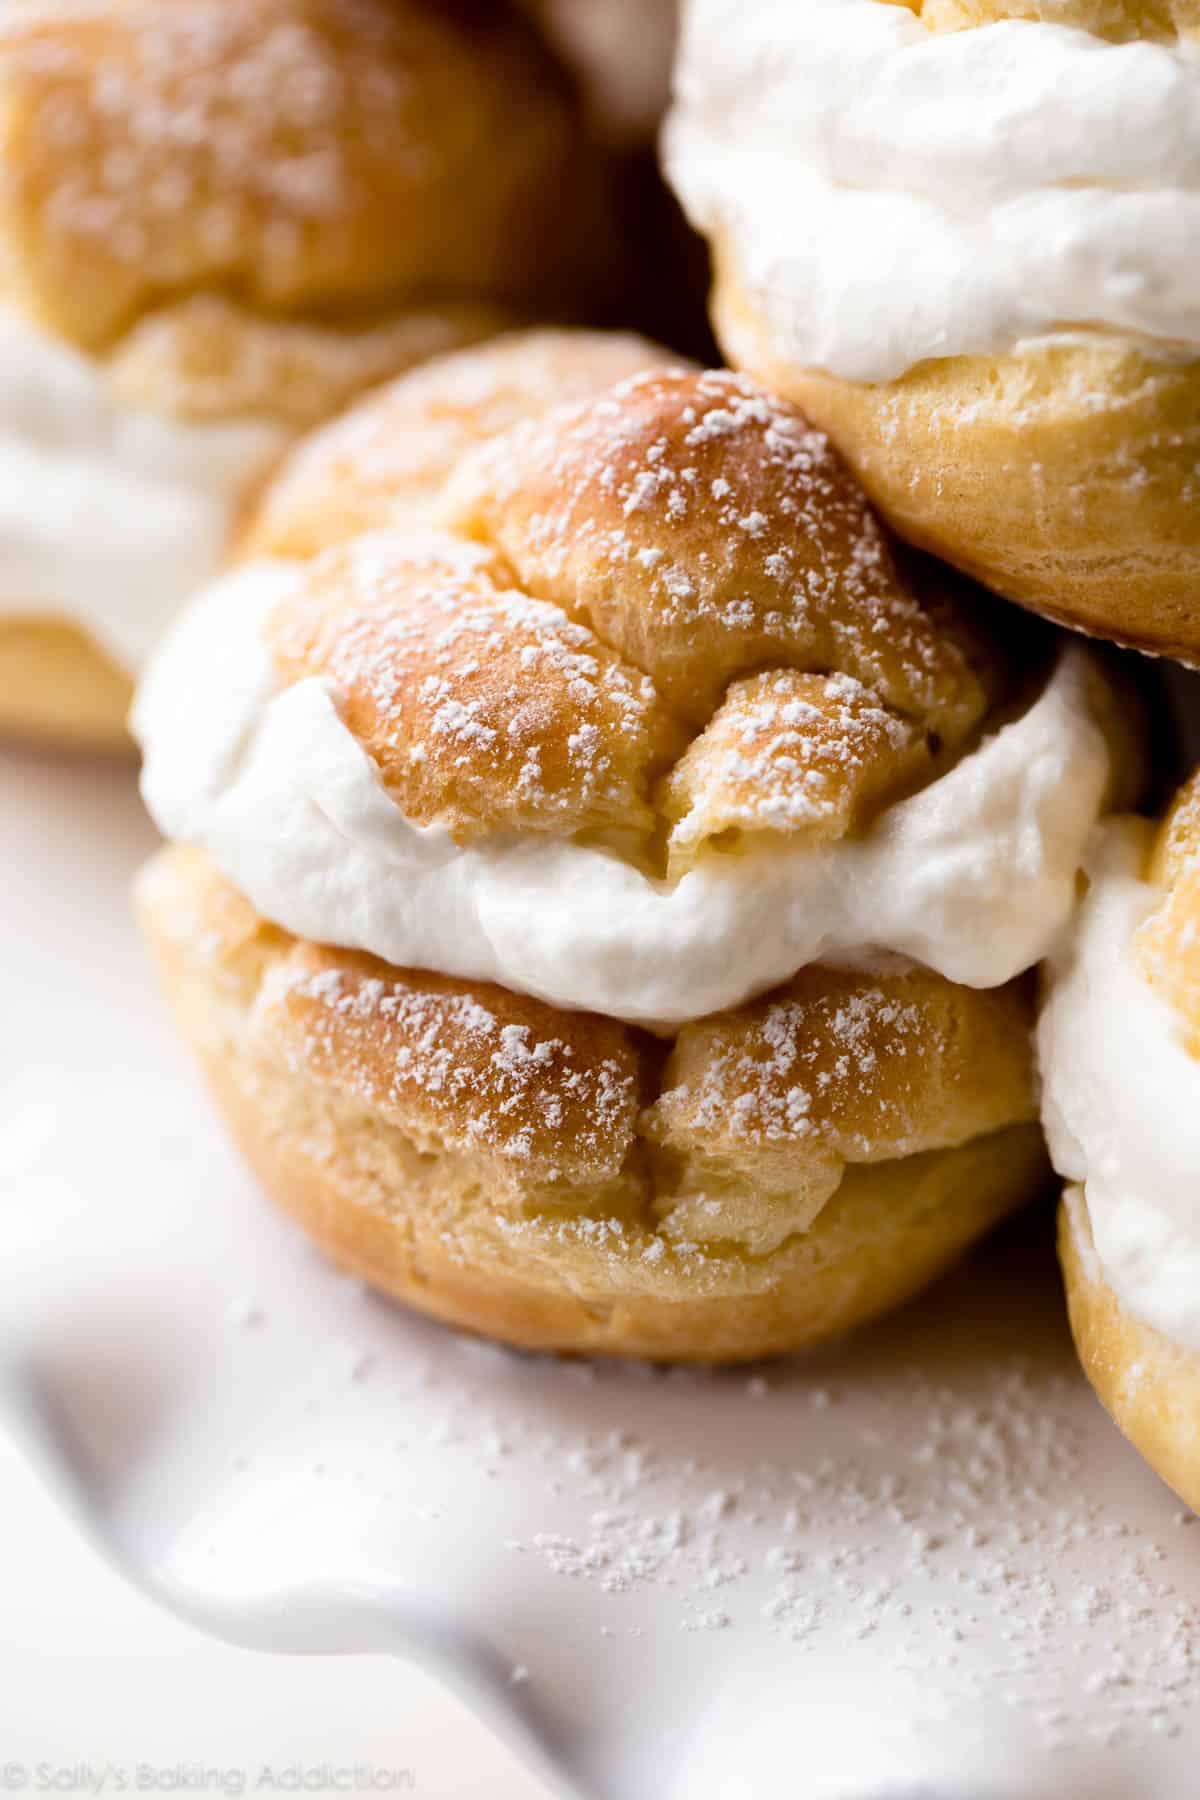 zoomed in image of a cream puff